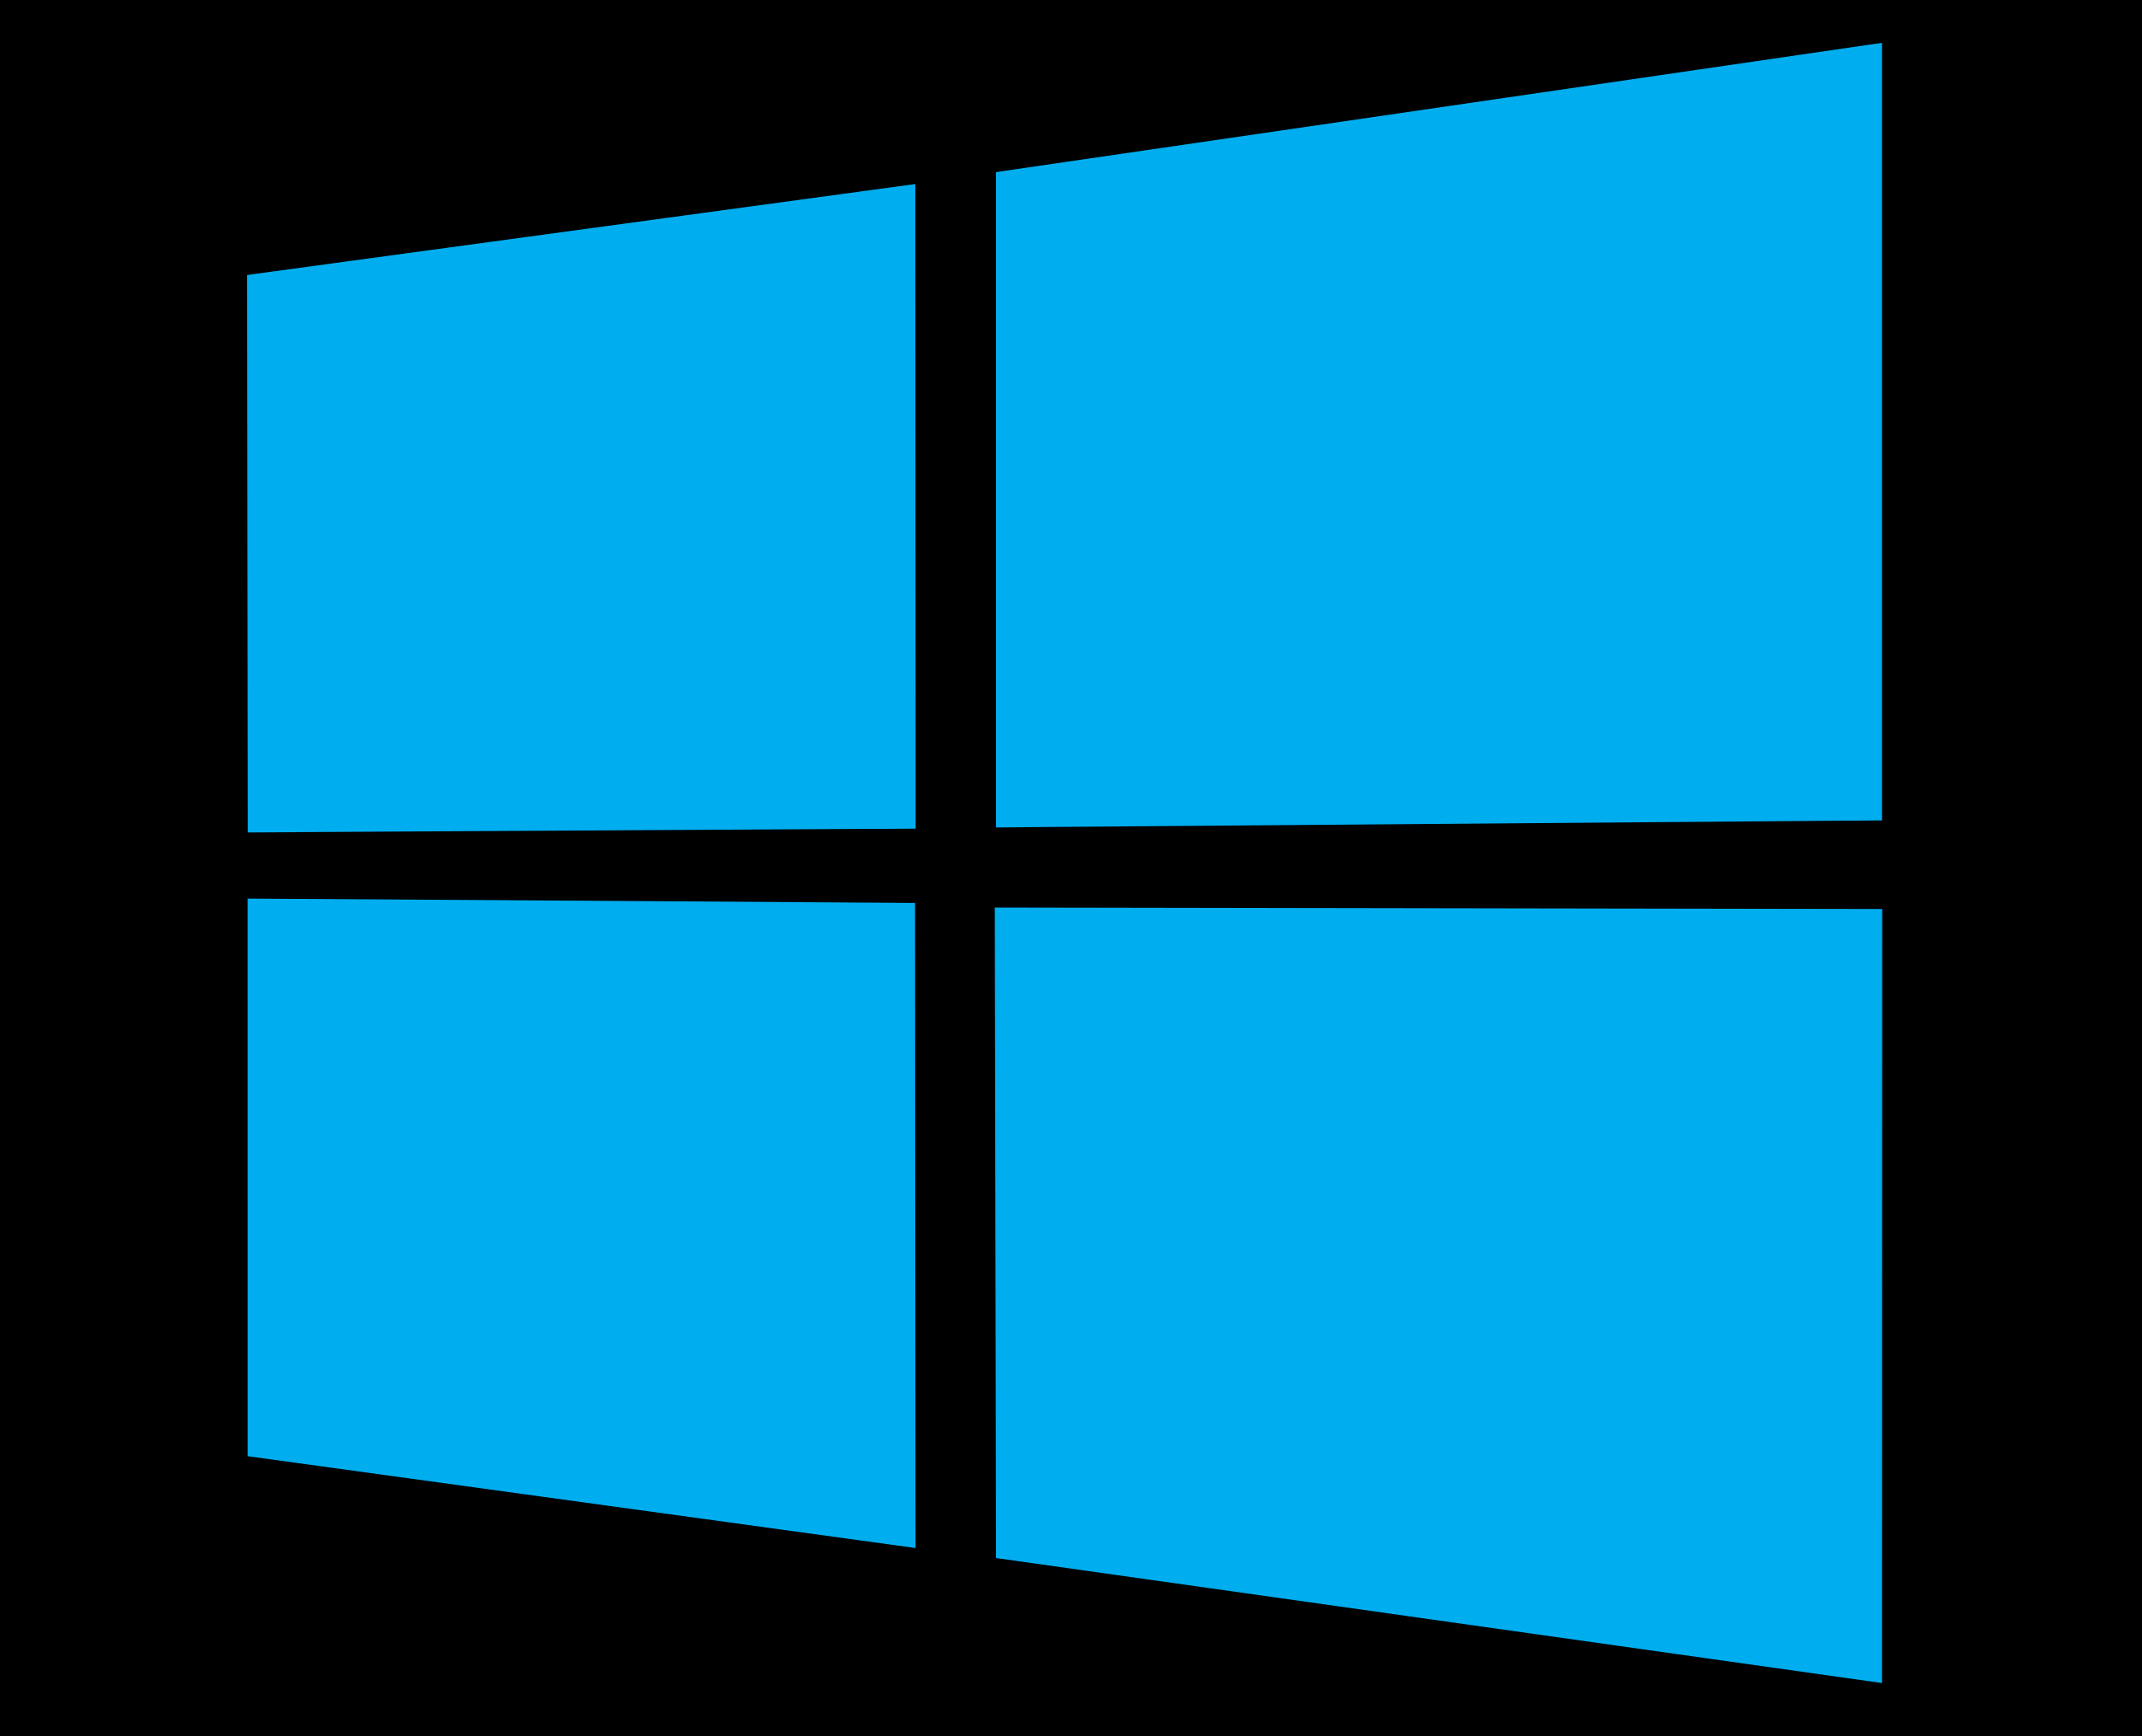 Black Windows Logo - Windows Logo, Windows Symbol, Meaning, History and Evolution